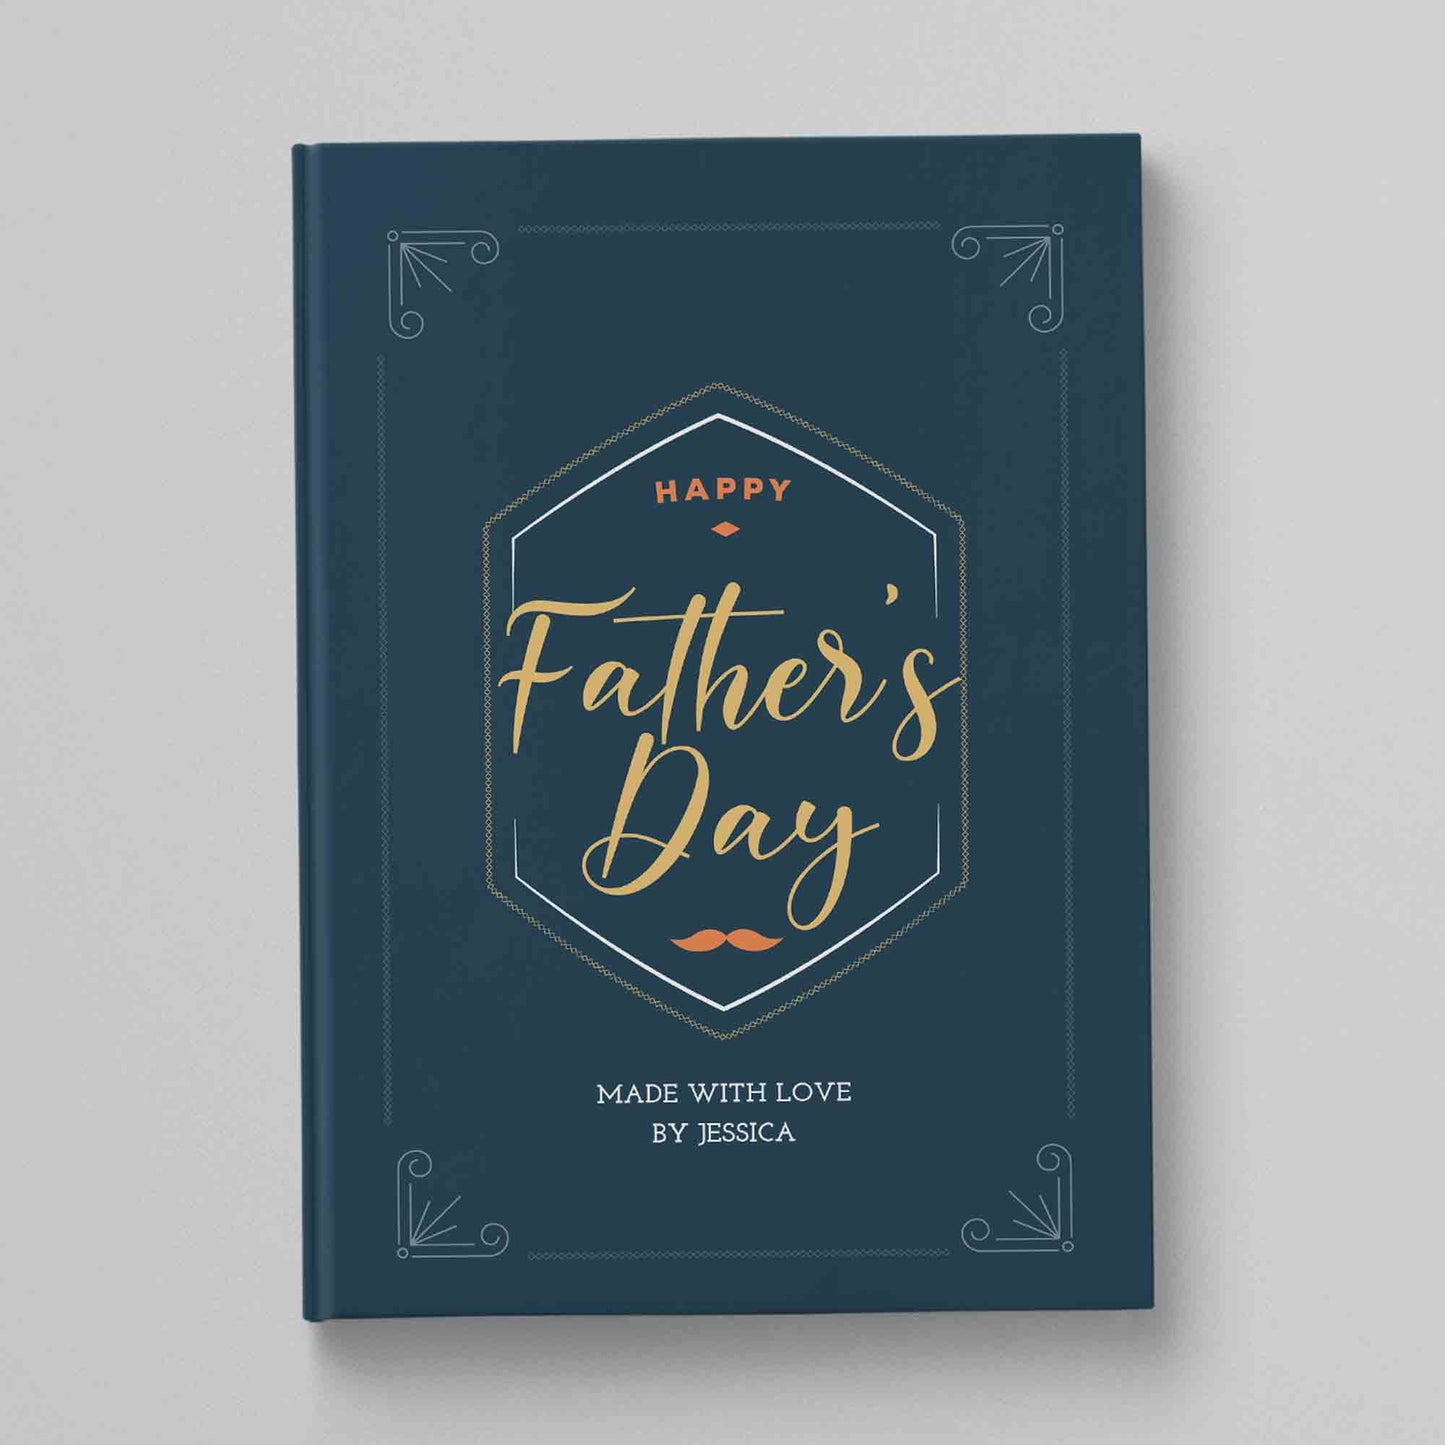 Book for dad. Gift for dad from kids.Father's Day gift ideas. Gift for father. Fill in the blank book. Luhvee Books.